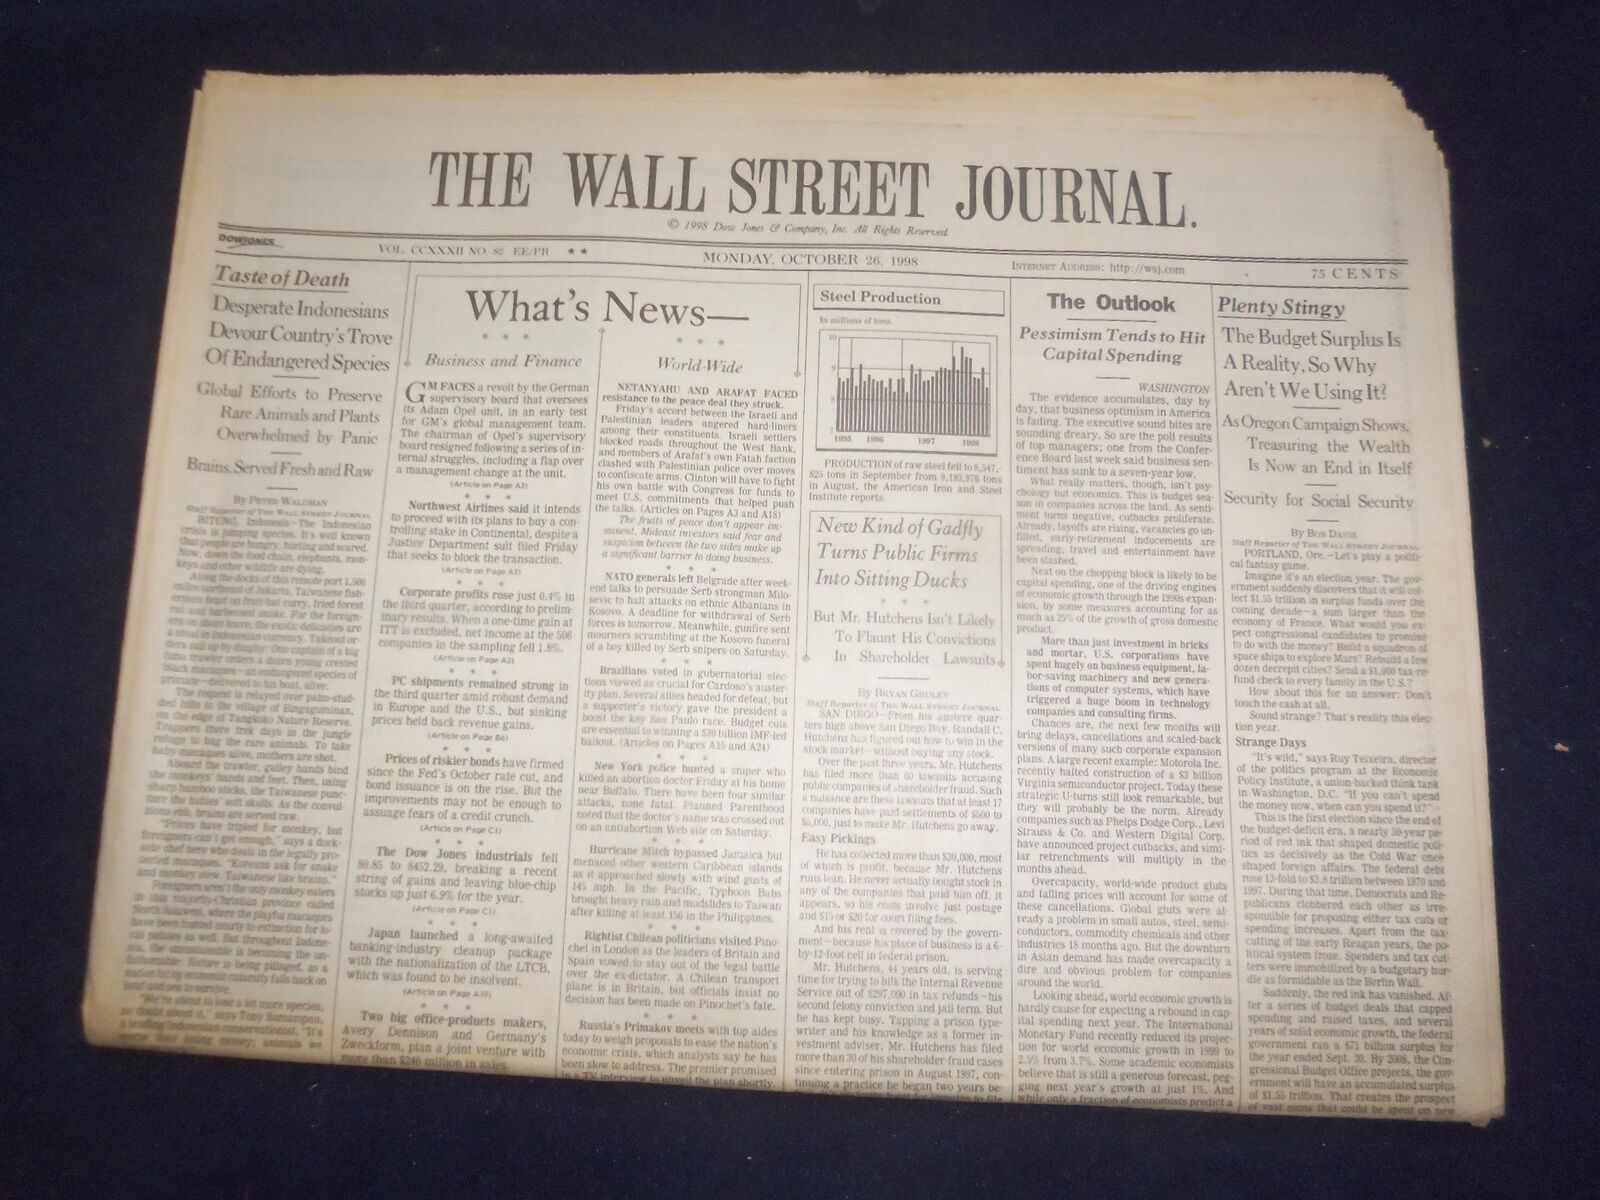 1998 OCT 26 THE WALL STREET JOURNAL-BUDGET SURPLUS A REALITY, WHY NOT USE- WJ 81